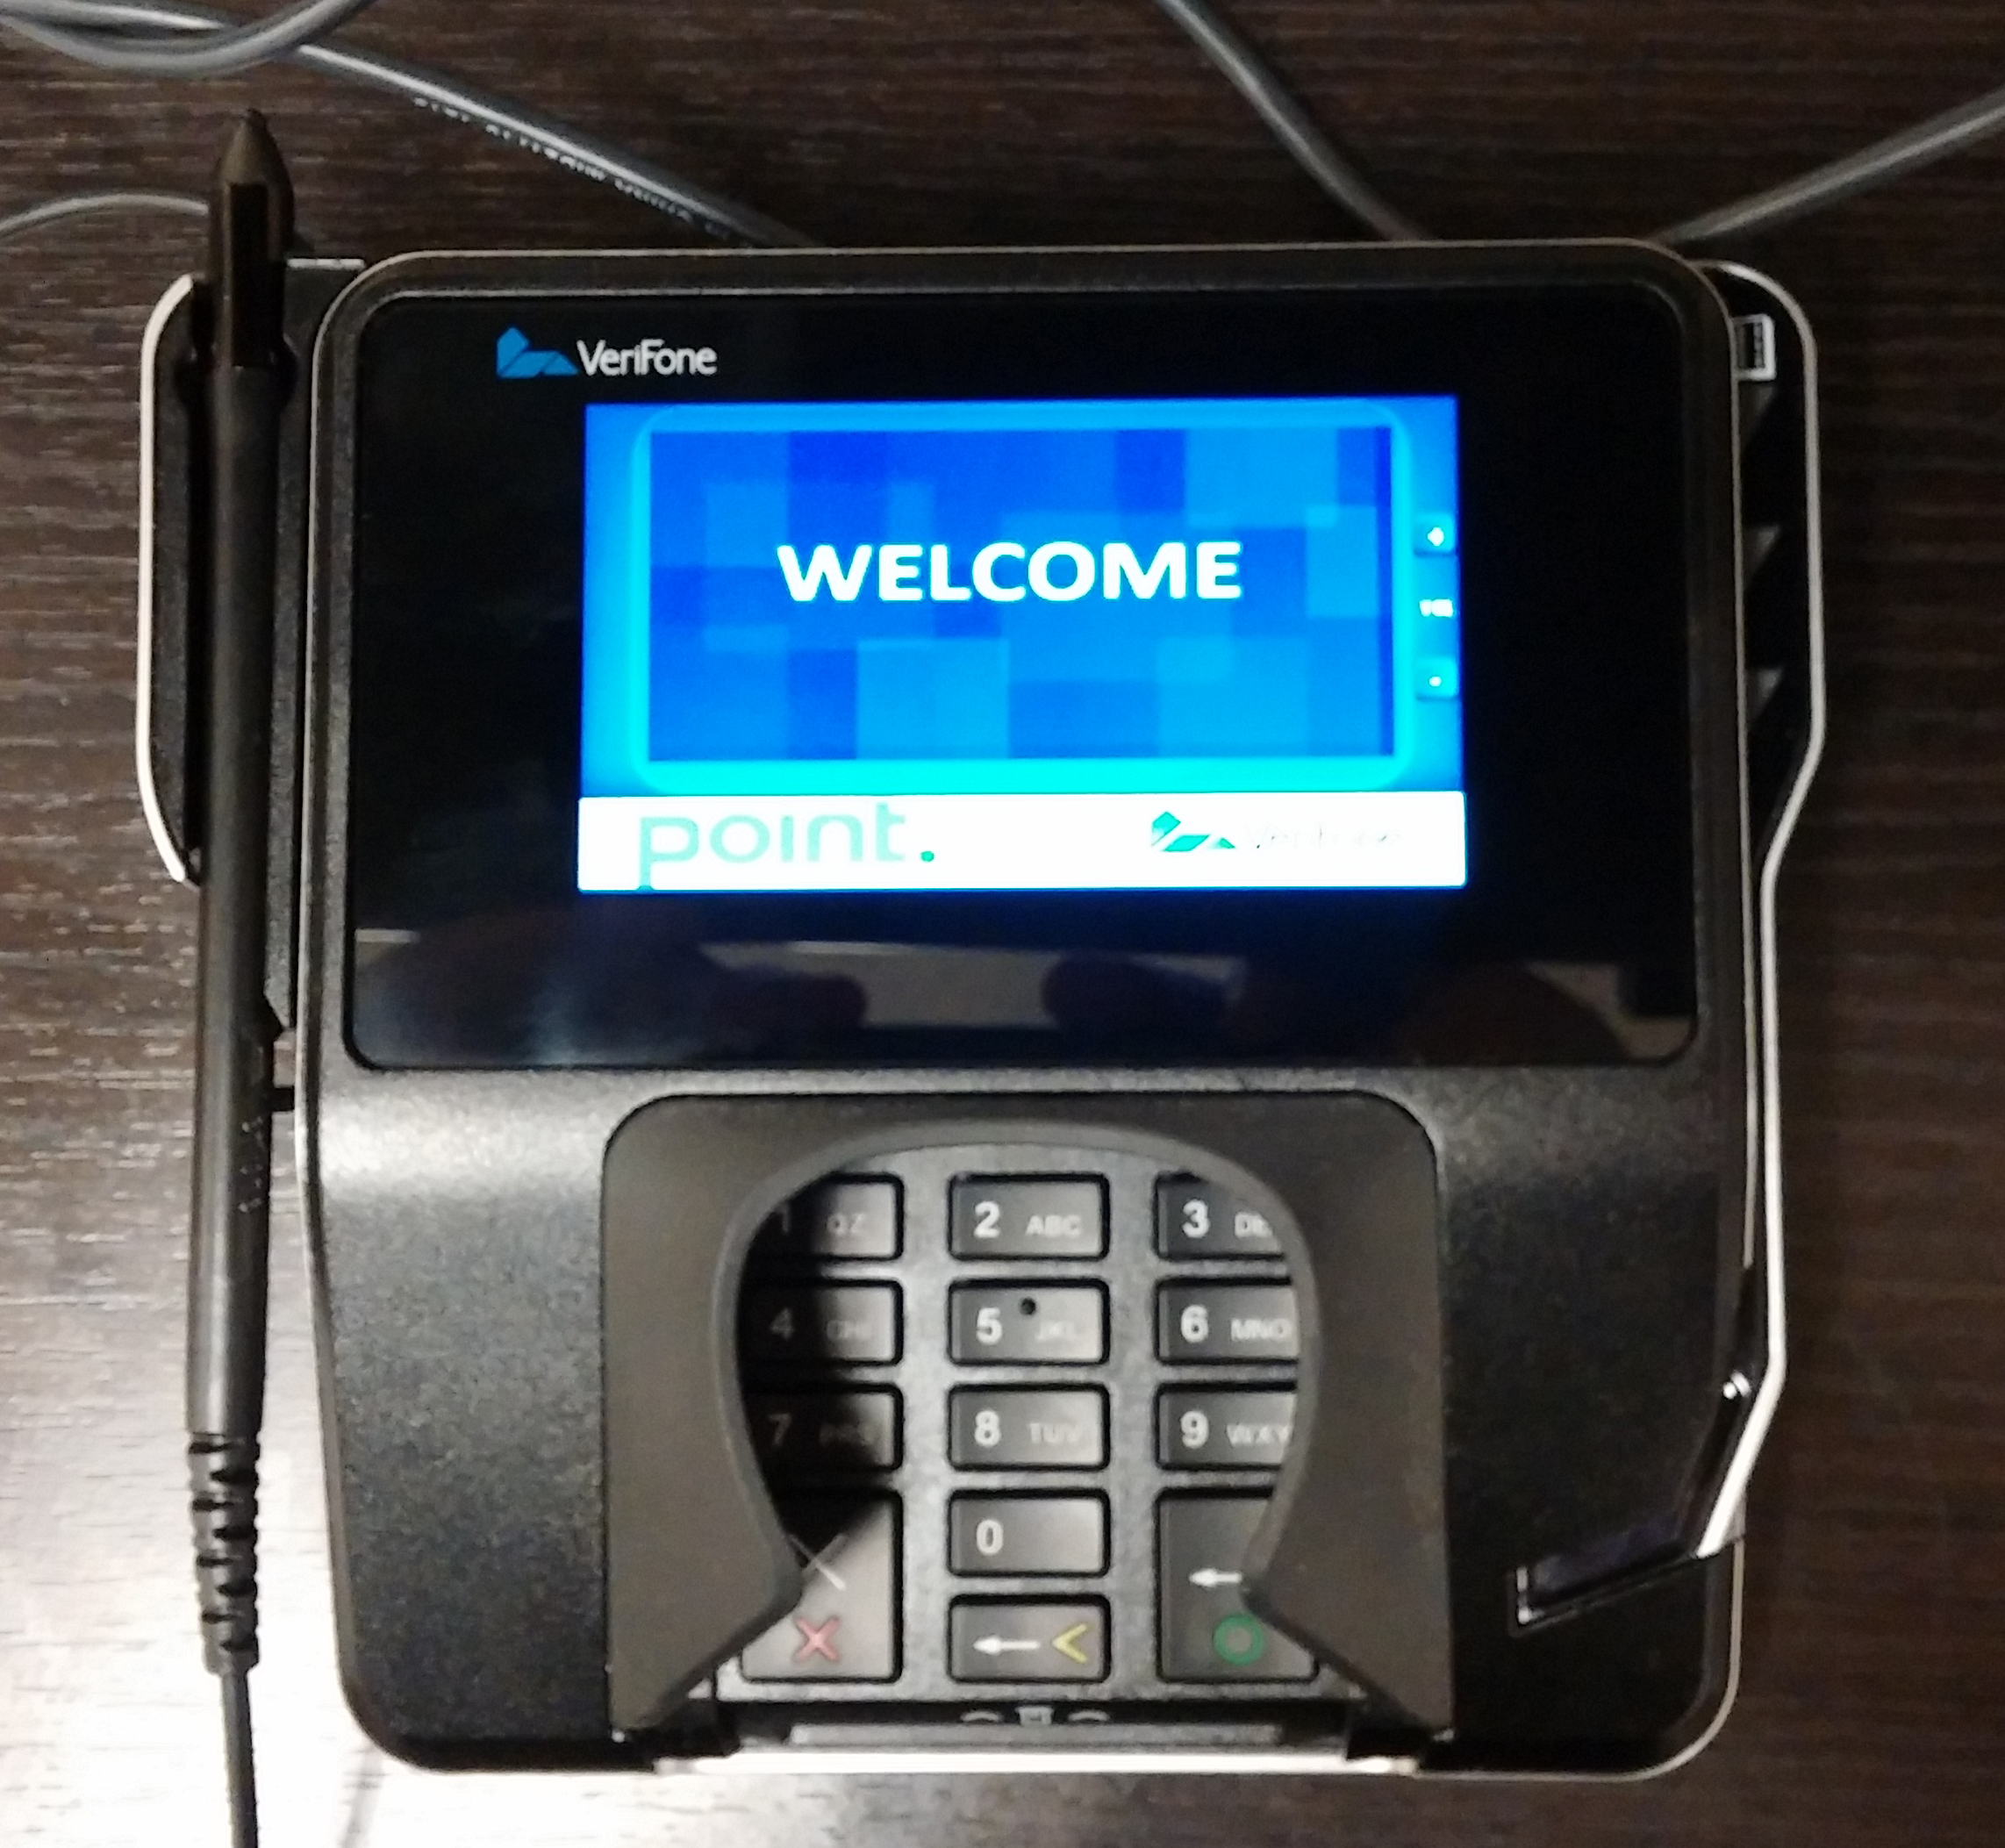 Verifone MX915 - Verifone Point (Welcome)